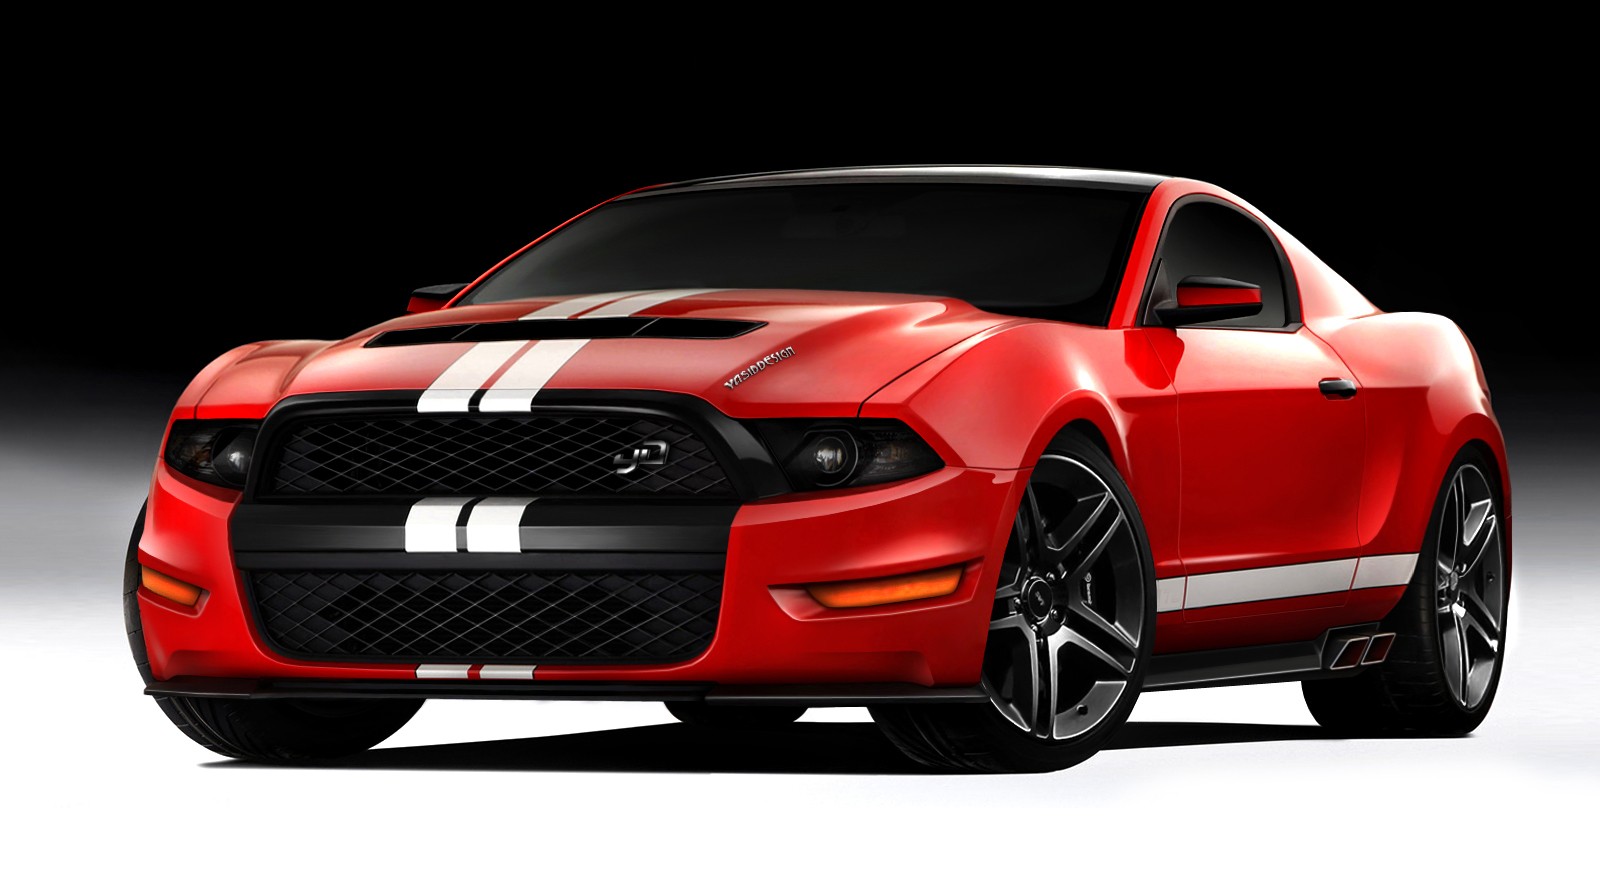 Ford Wallpaper 5493 Hd Wallpapers in Cars   Imagescicom